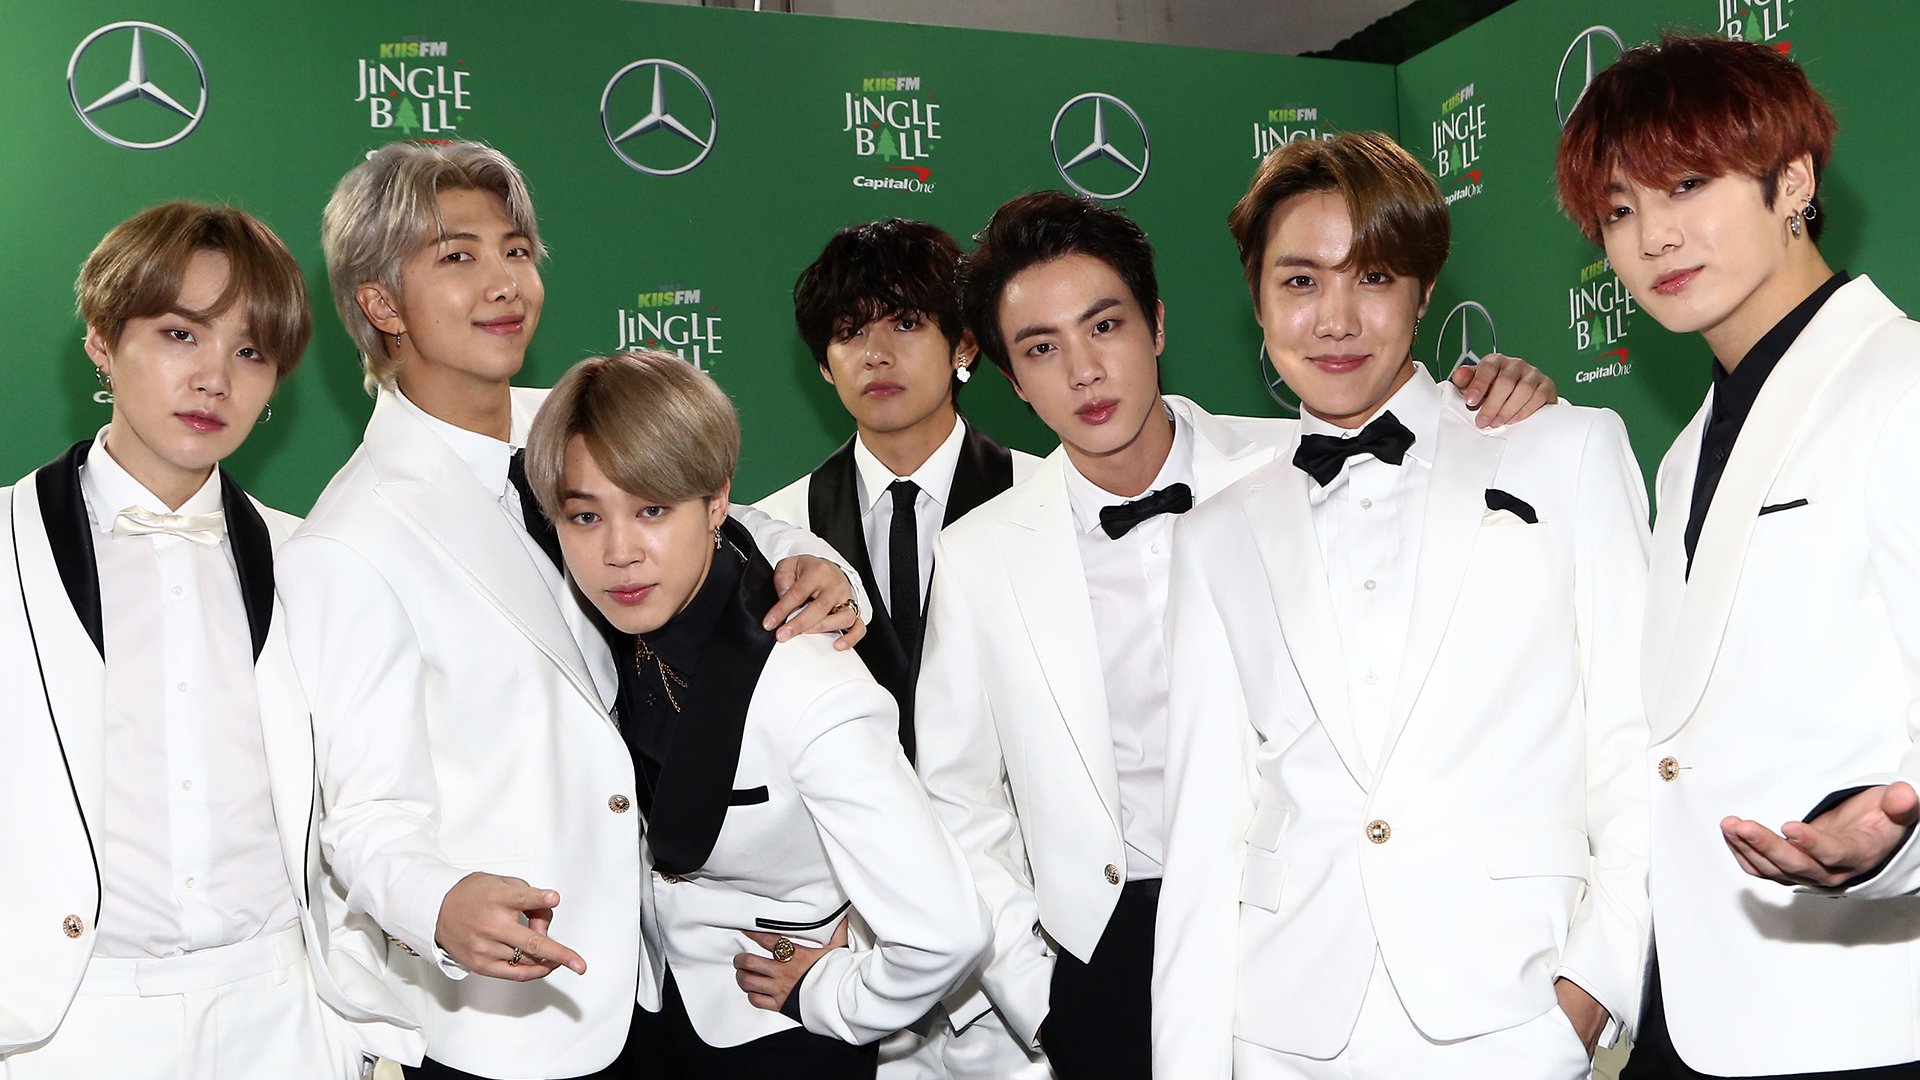 BTS attends 102.7 KIIS FM's Jingle Ball 2019 Presented by Capital One at the Forum on December 6, 2019 in Los Angeles, California.